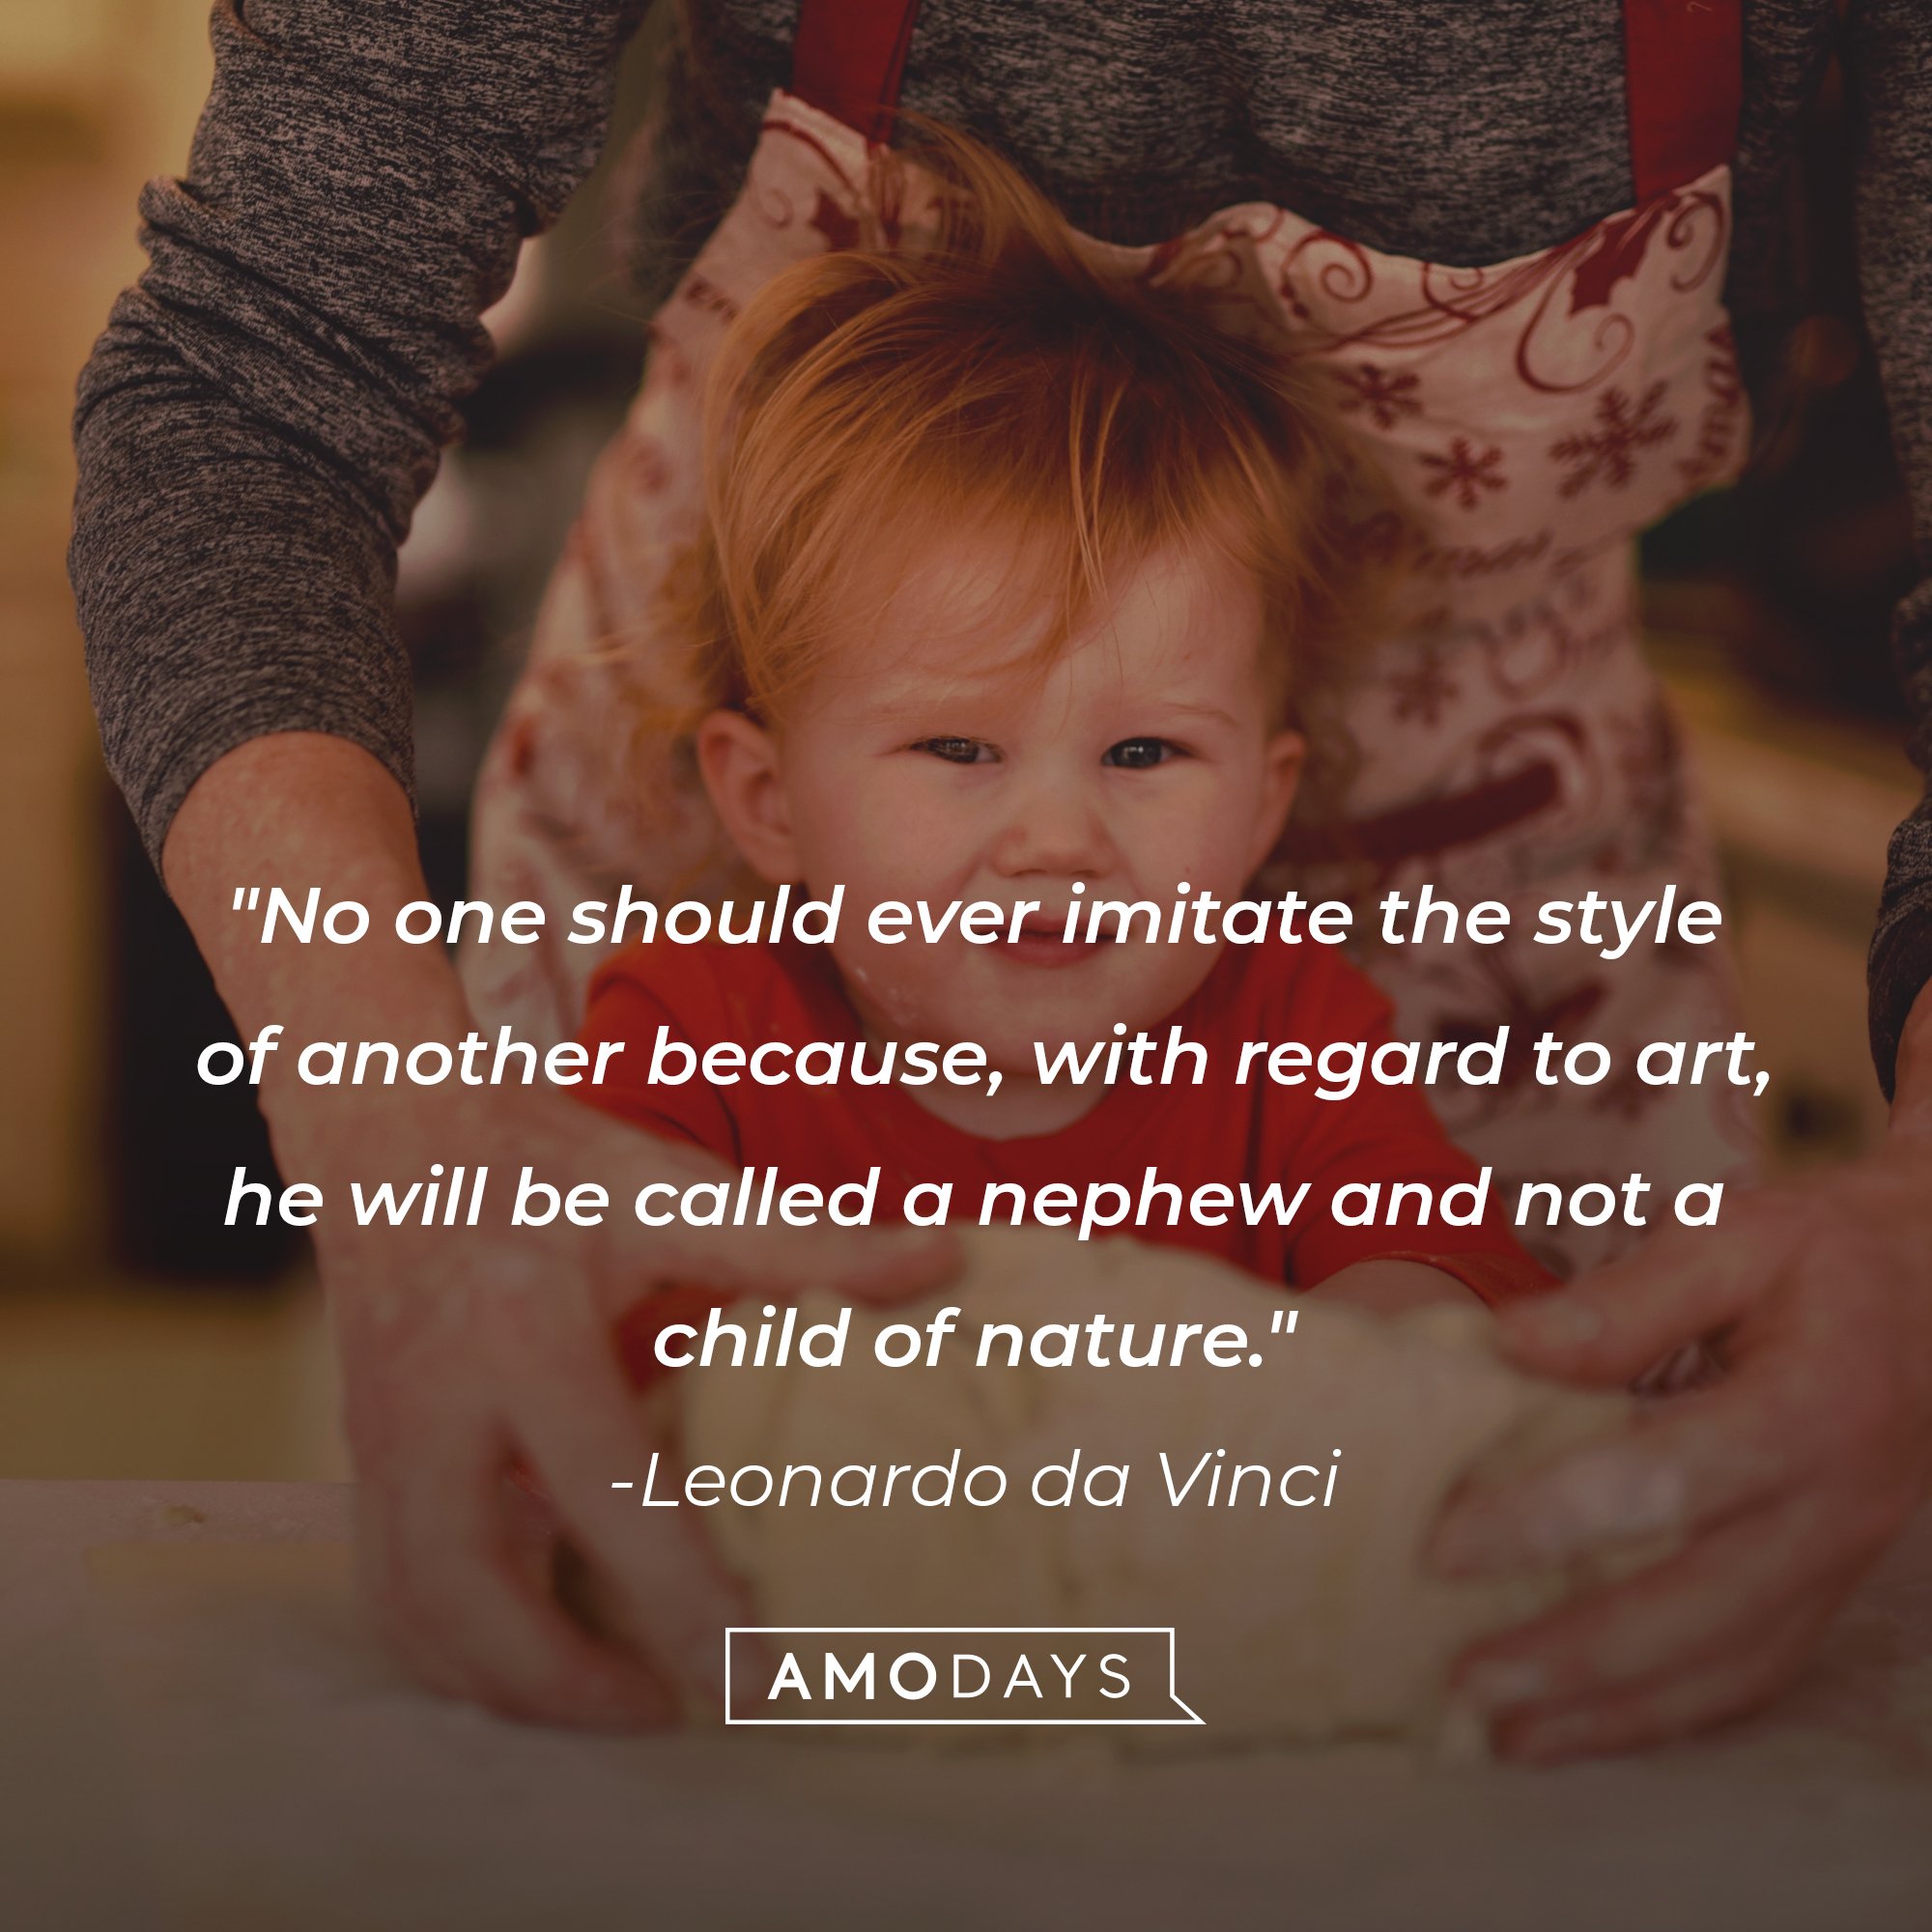 Leonardo da Vinci's quote: "No one should ever imitate the style of another because, with regard to art, he will be called a nephew and not a child of nature." | Image: AmoDays